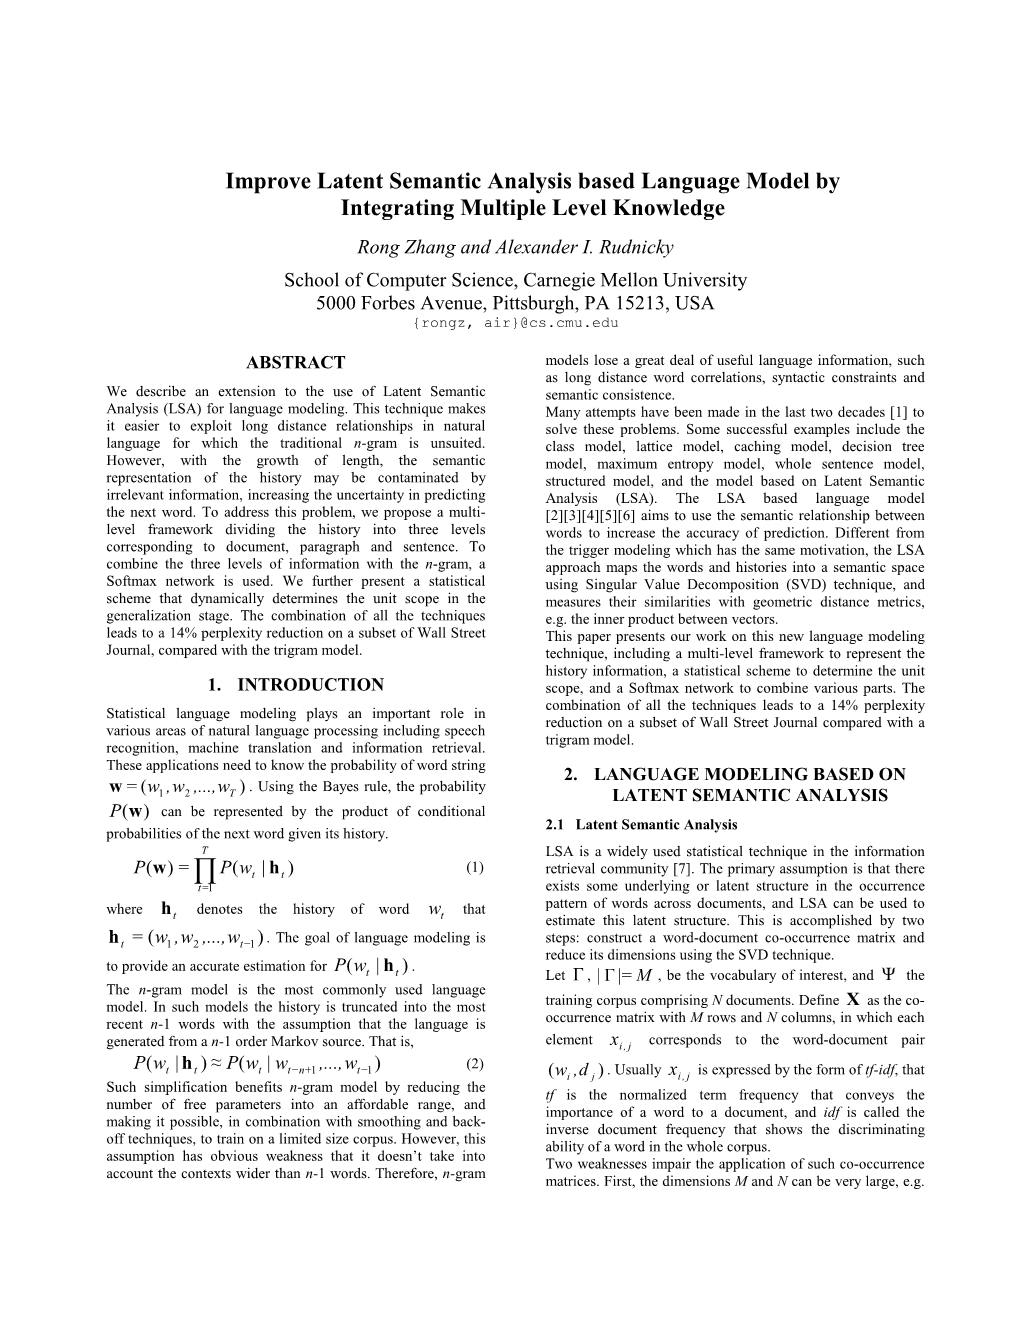 Improve Latent Semantic Analysis Based Language Model by Integrating Multiple Level Knowledge Rong Zhang and Alexander I